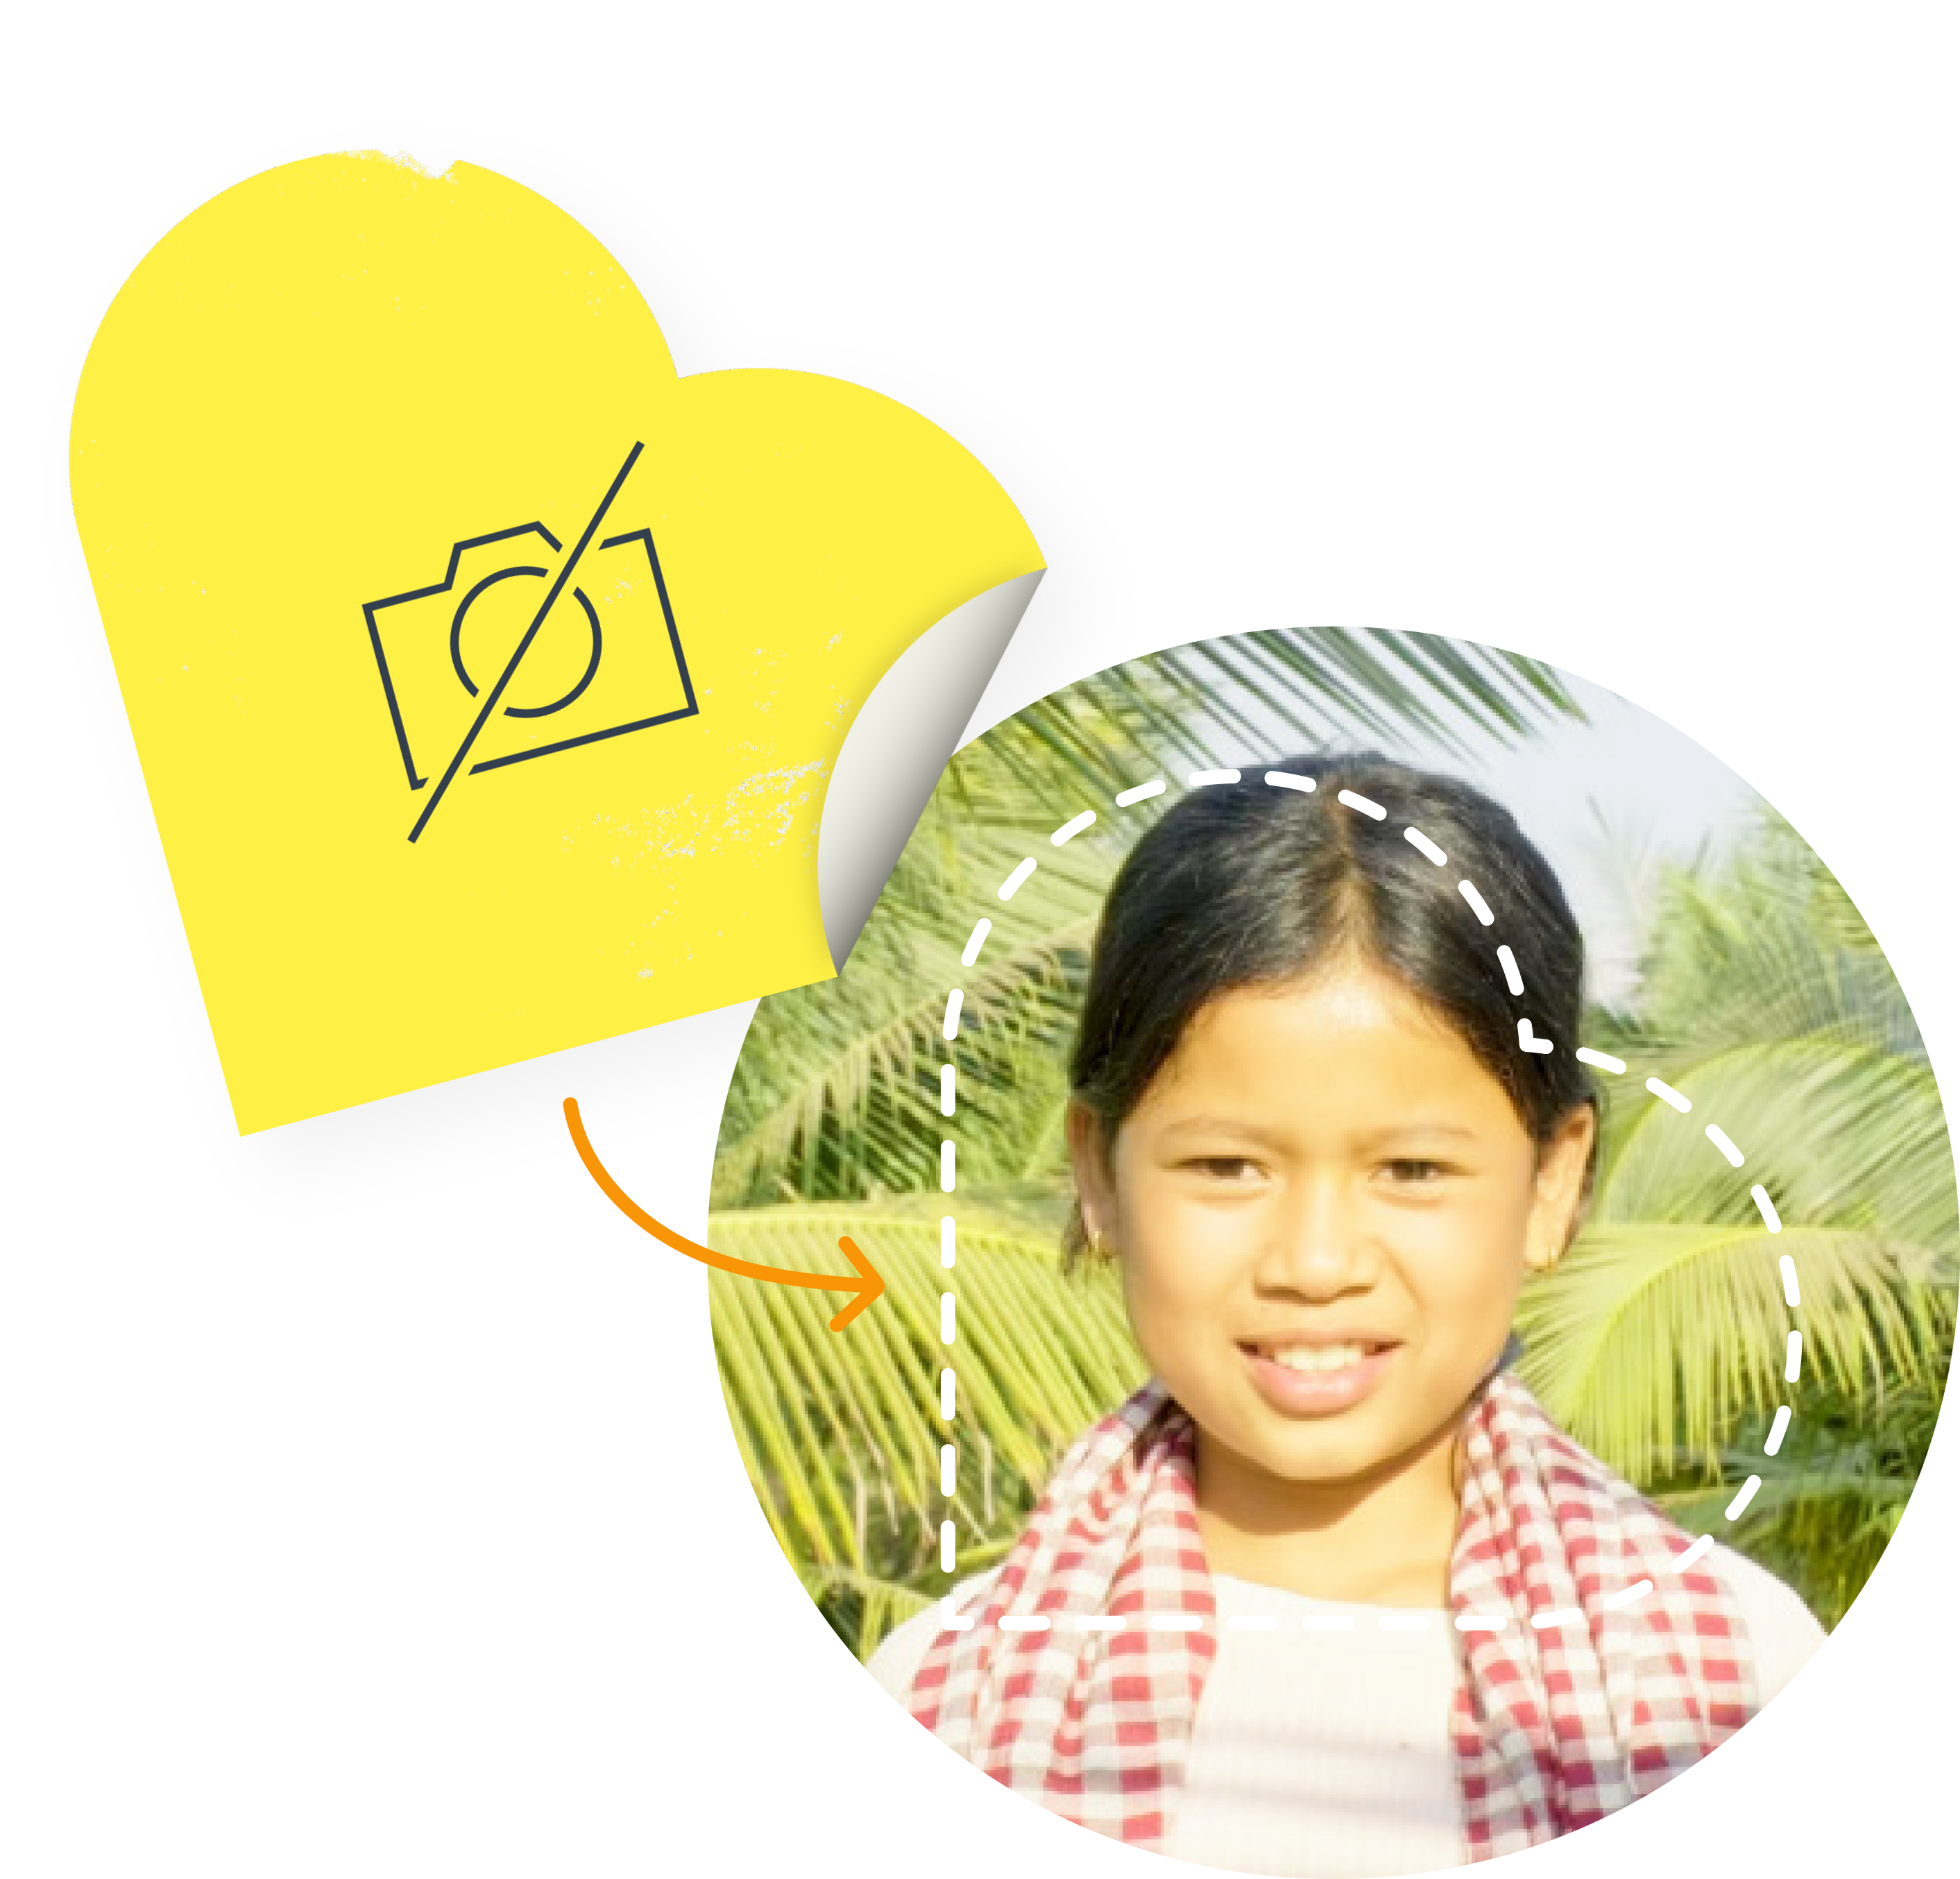 Yellow sticker covering child's face